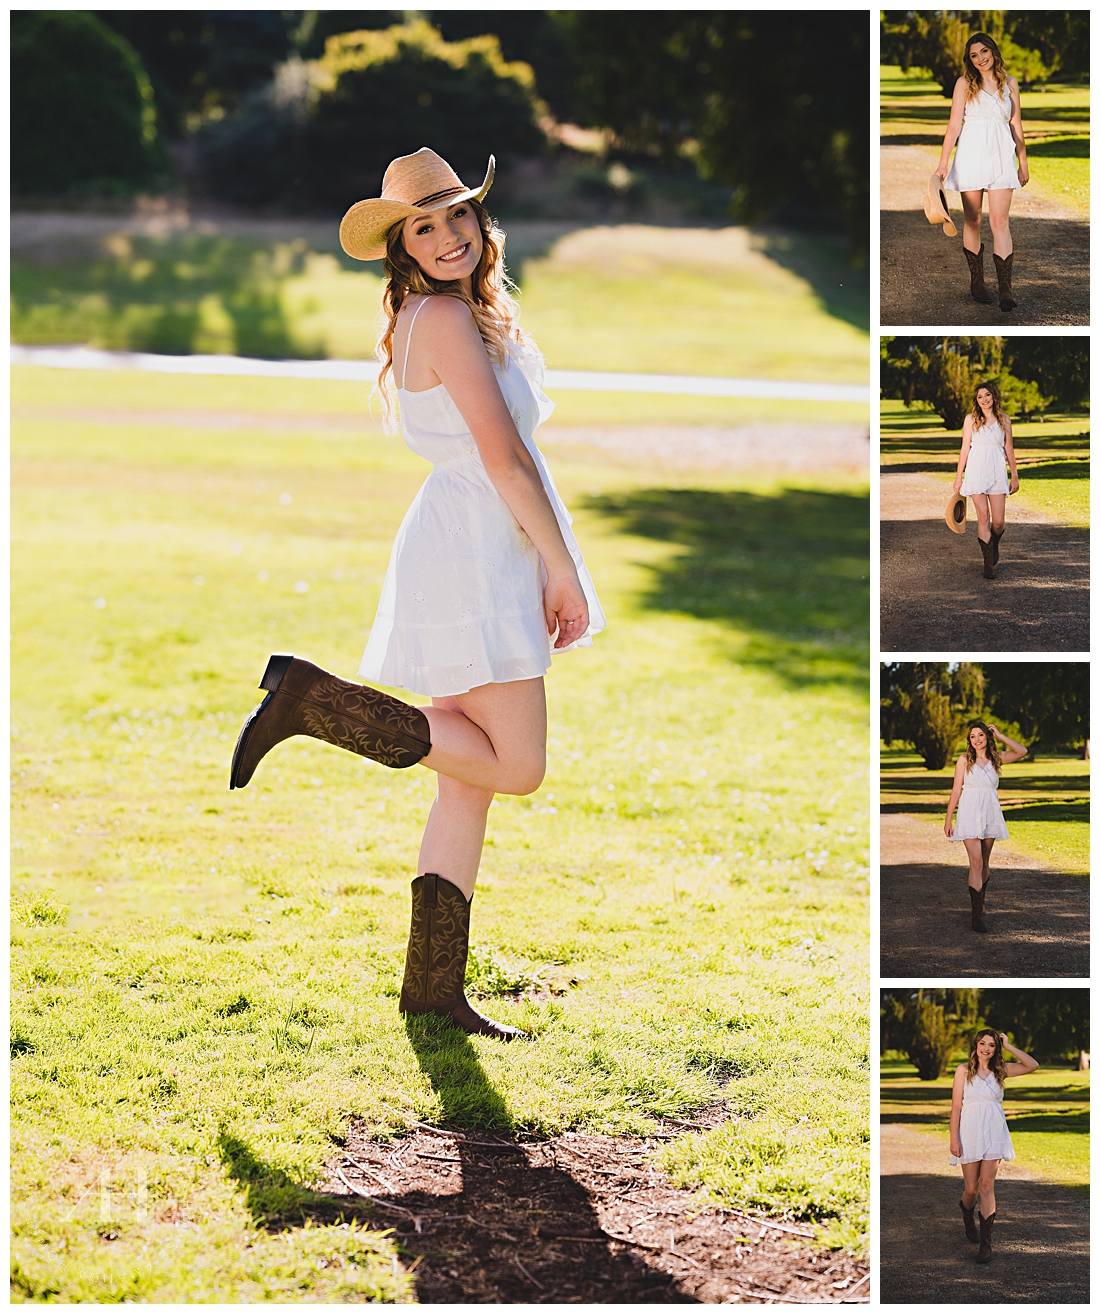 Cute Summer Portraits with Boots and Hat | How to Style Senior Portraits | Photographed by the Best Tacoma Senior Photographer Amanda Howse Photography